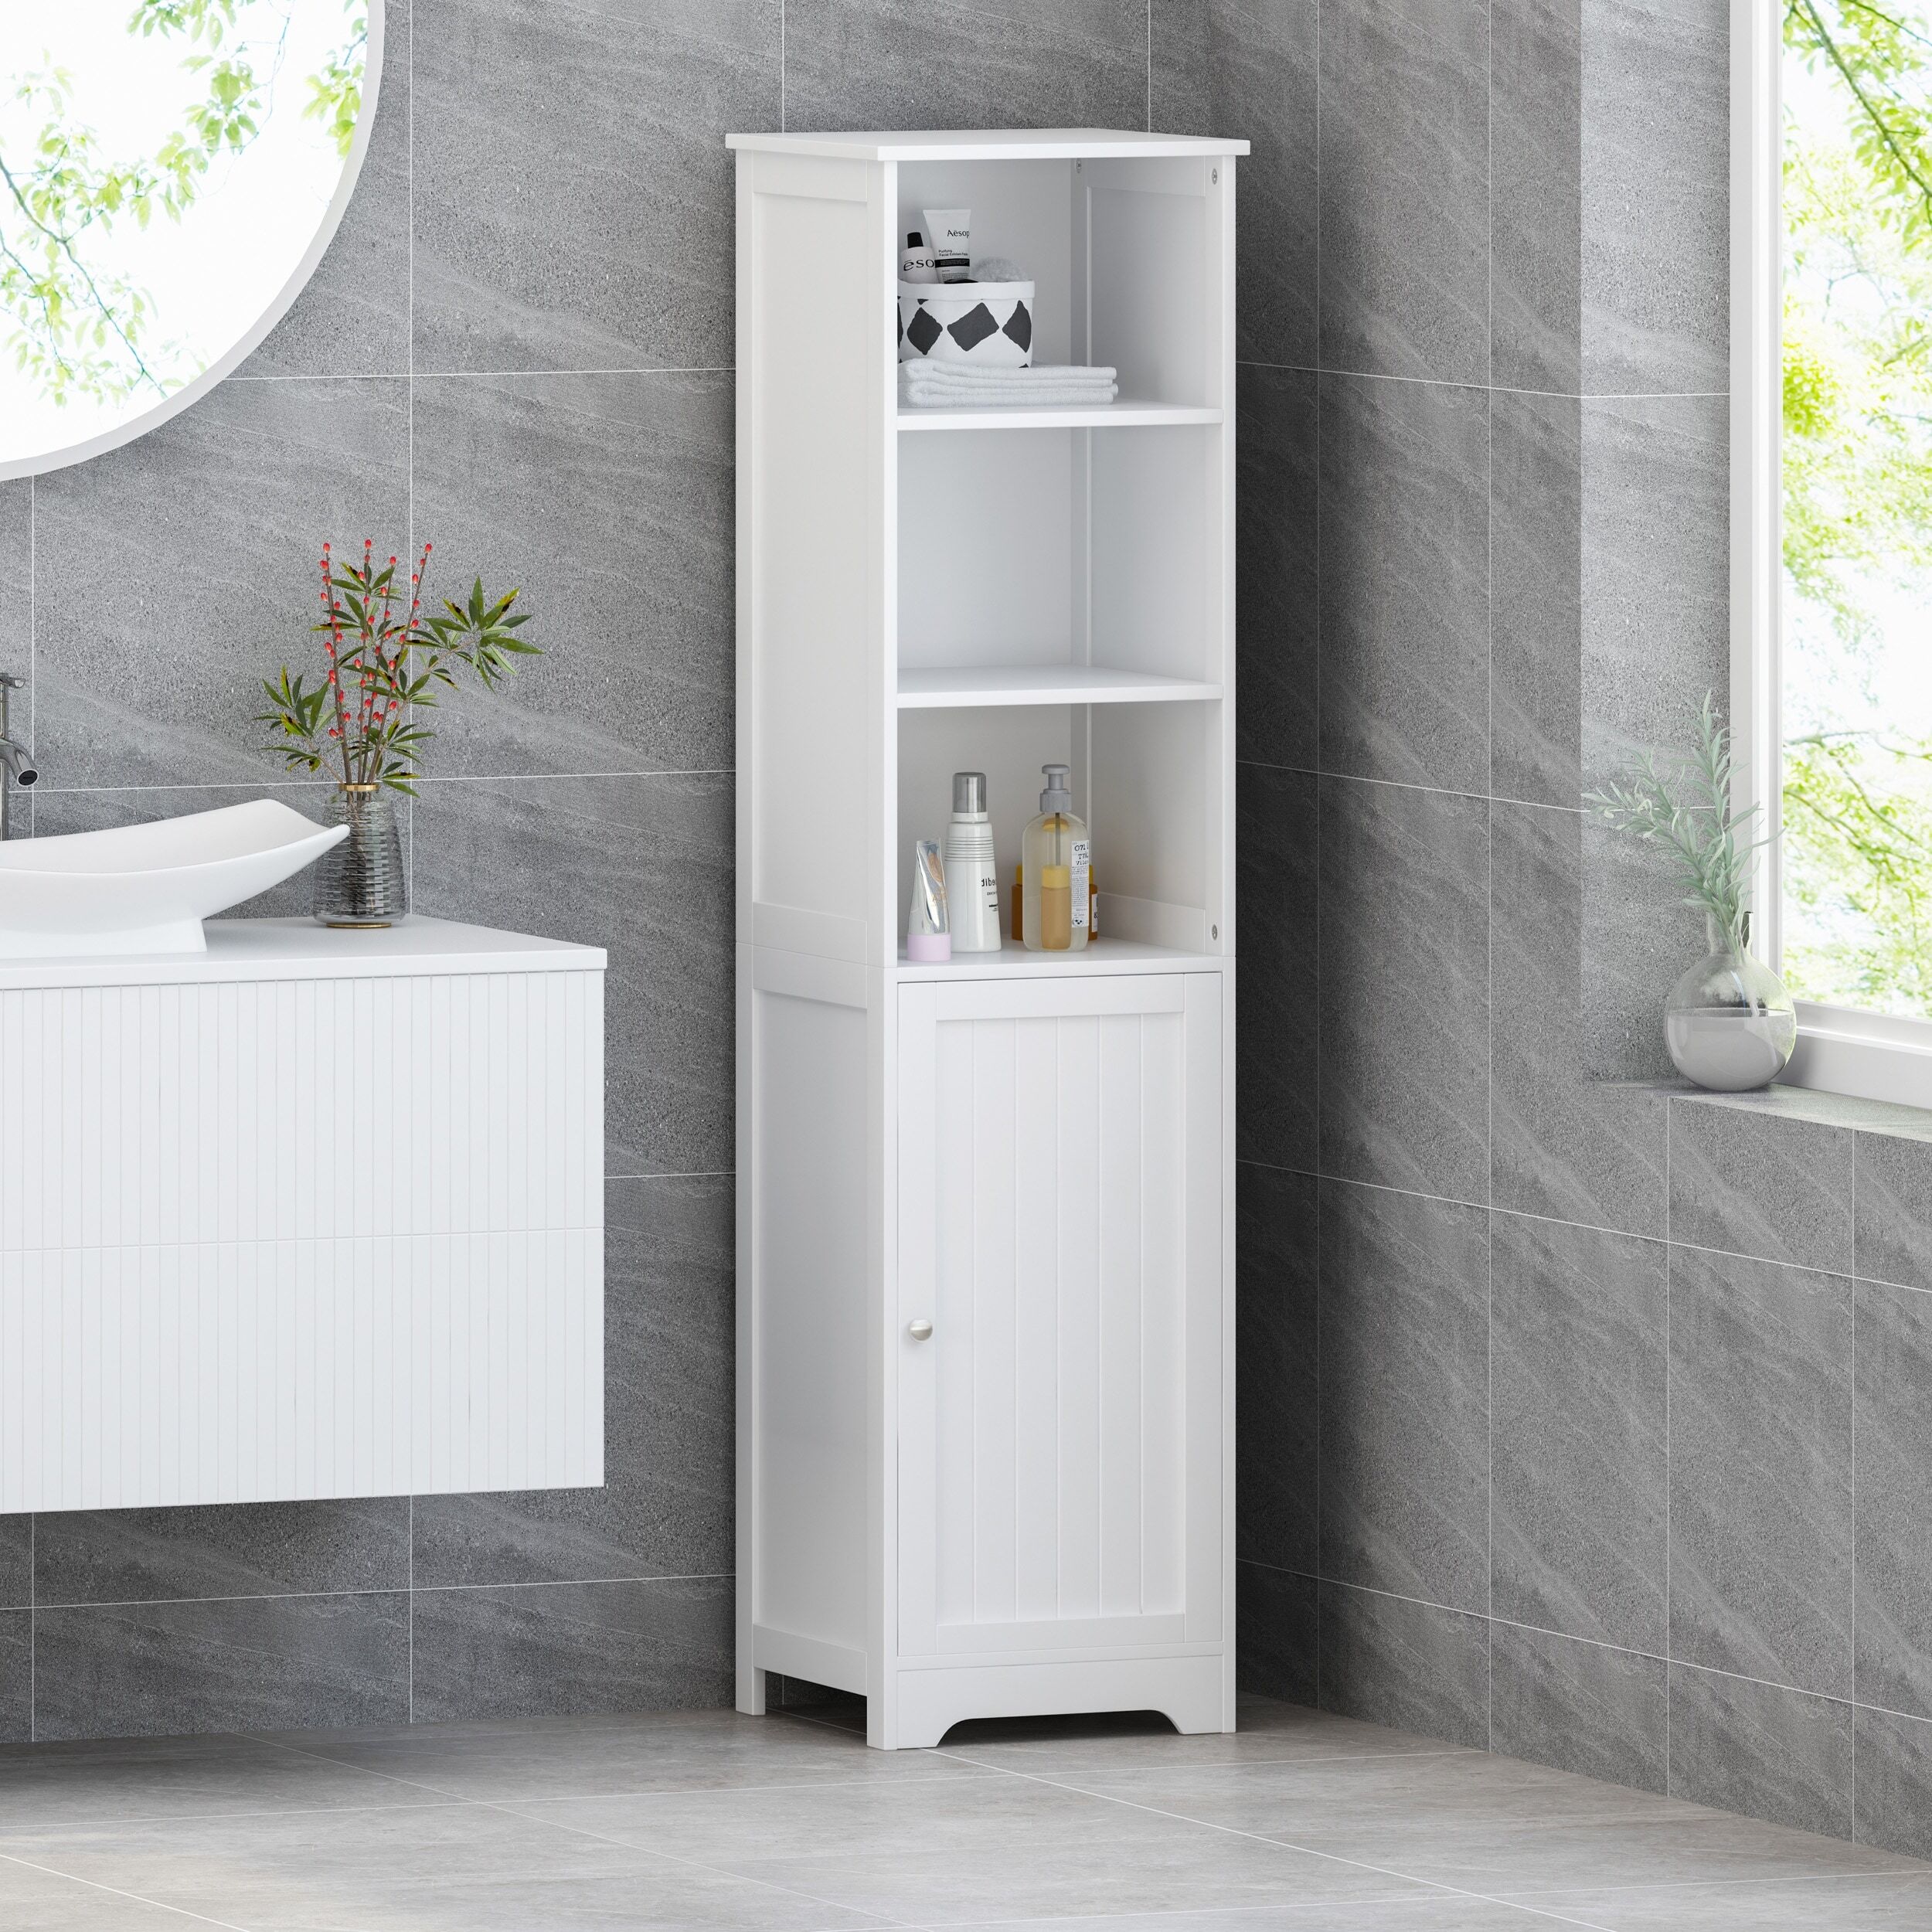 Traditional bathroom linen tower with open shelves